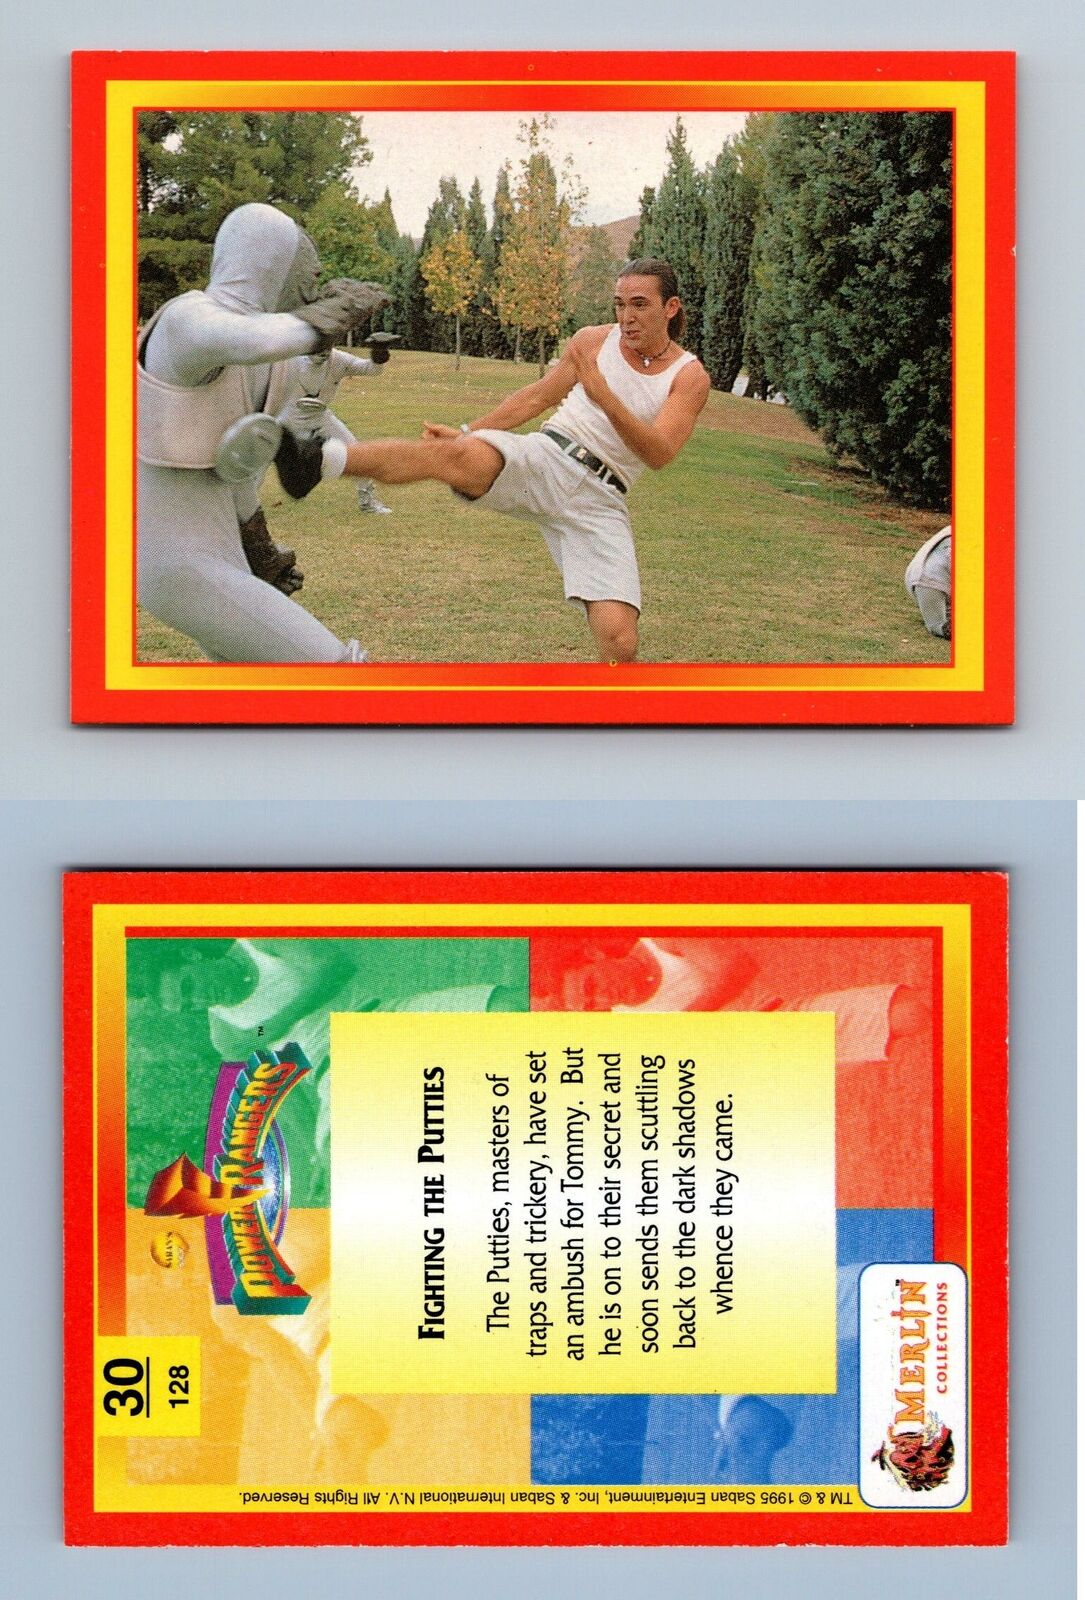 Fighting The Putties #30 Power Rangers 1995 Merlin Trading Card